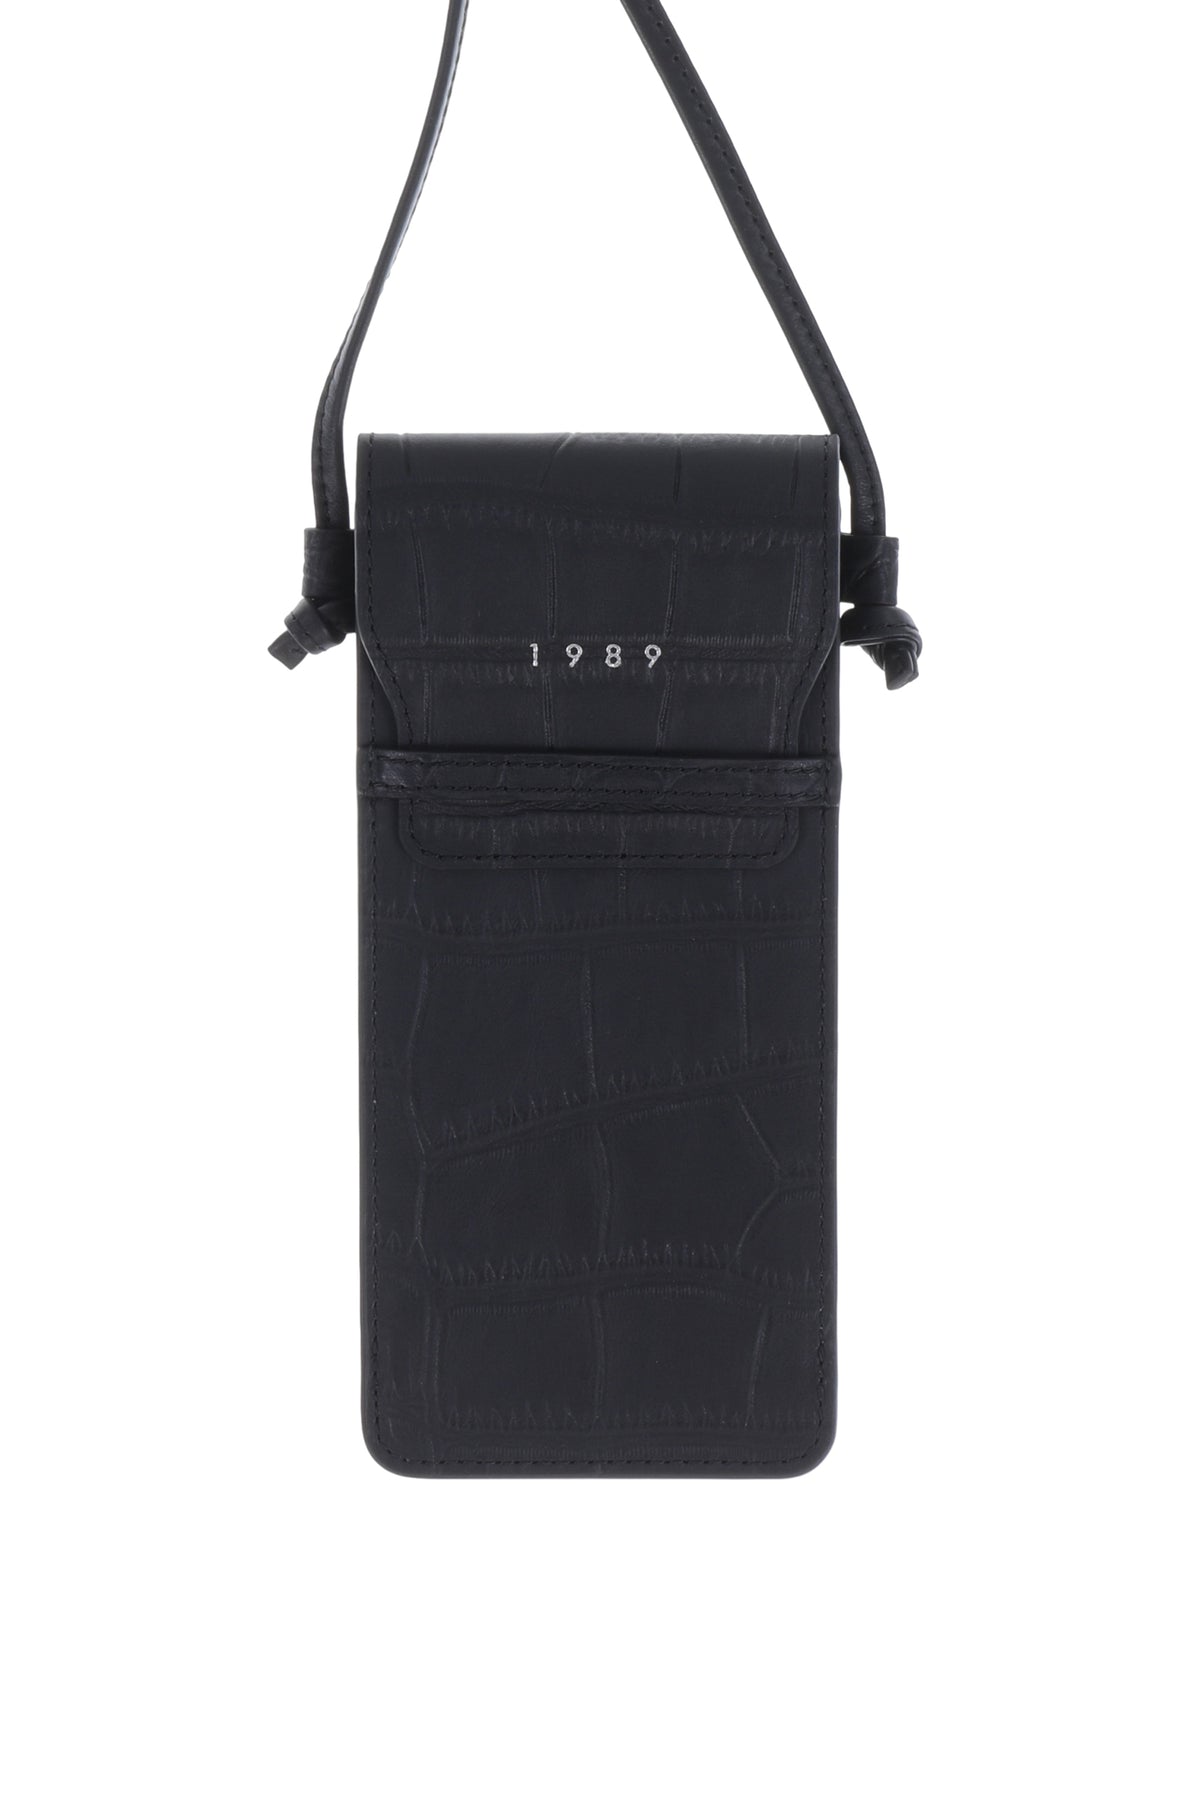 1989 CROCO EMBOSSED LOGO PHONE POUCH / BLK